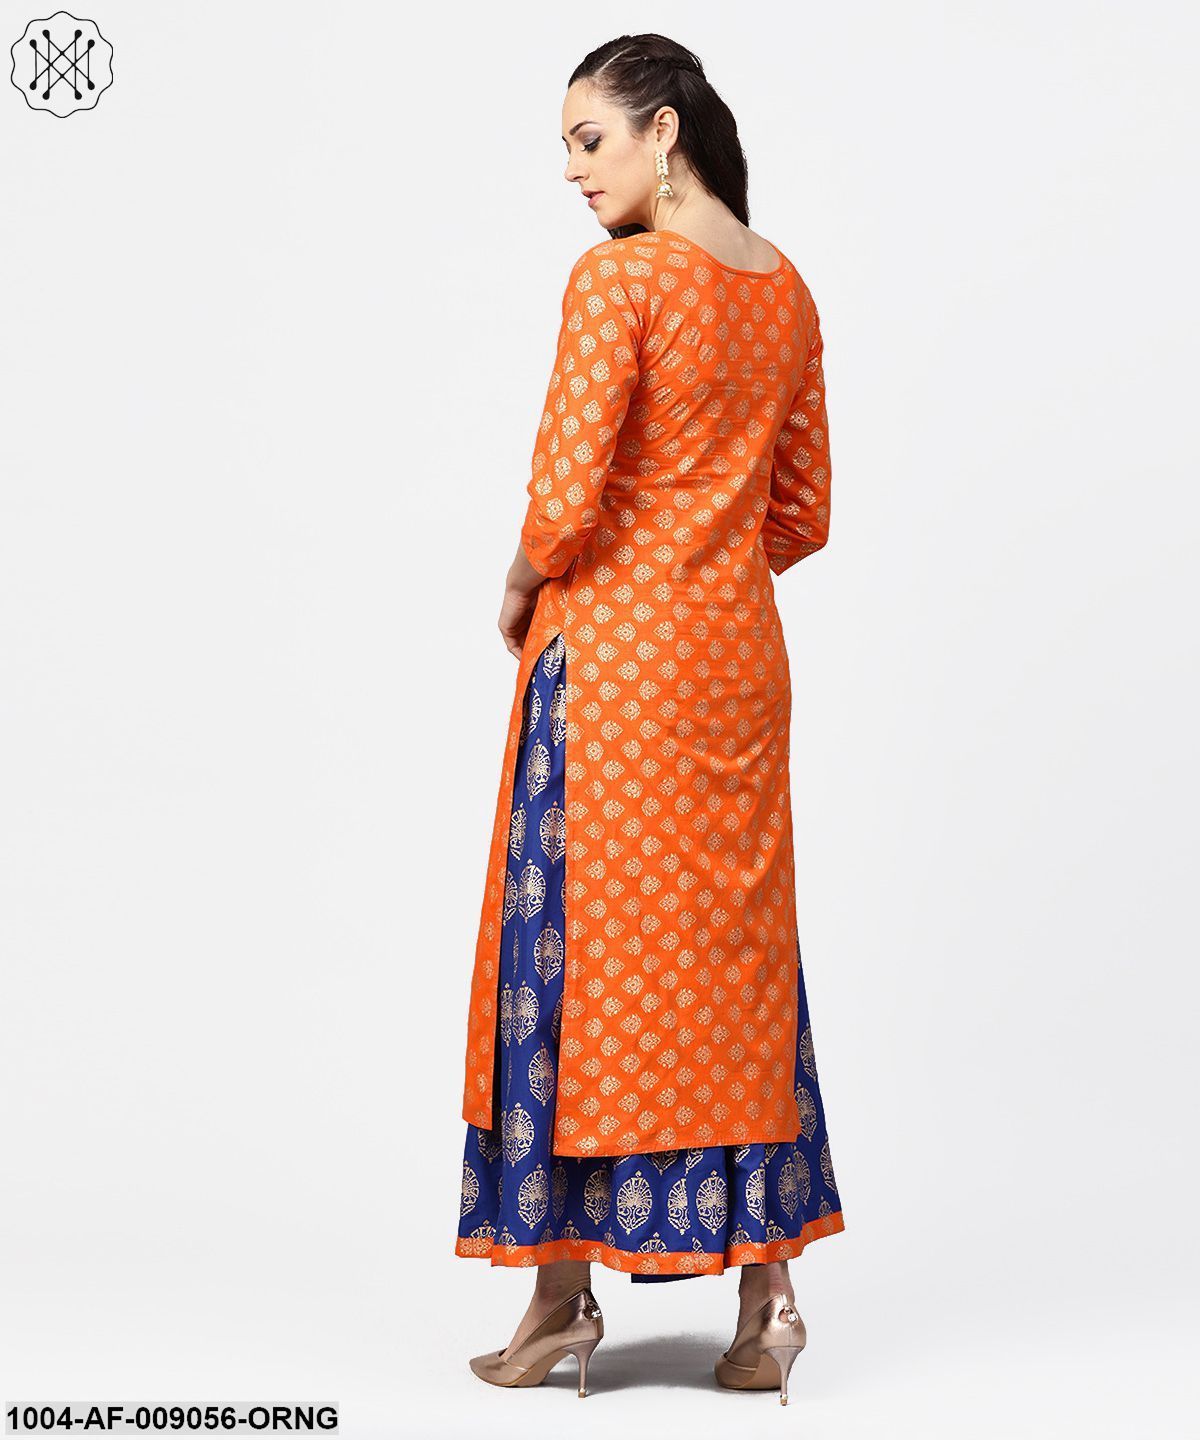 Orange Printed 3/4Th Sleeve Cotton Kurta With Blue Printed Flared Ankle Length Skirt